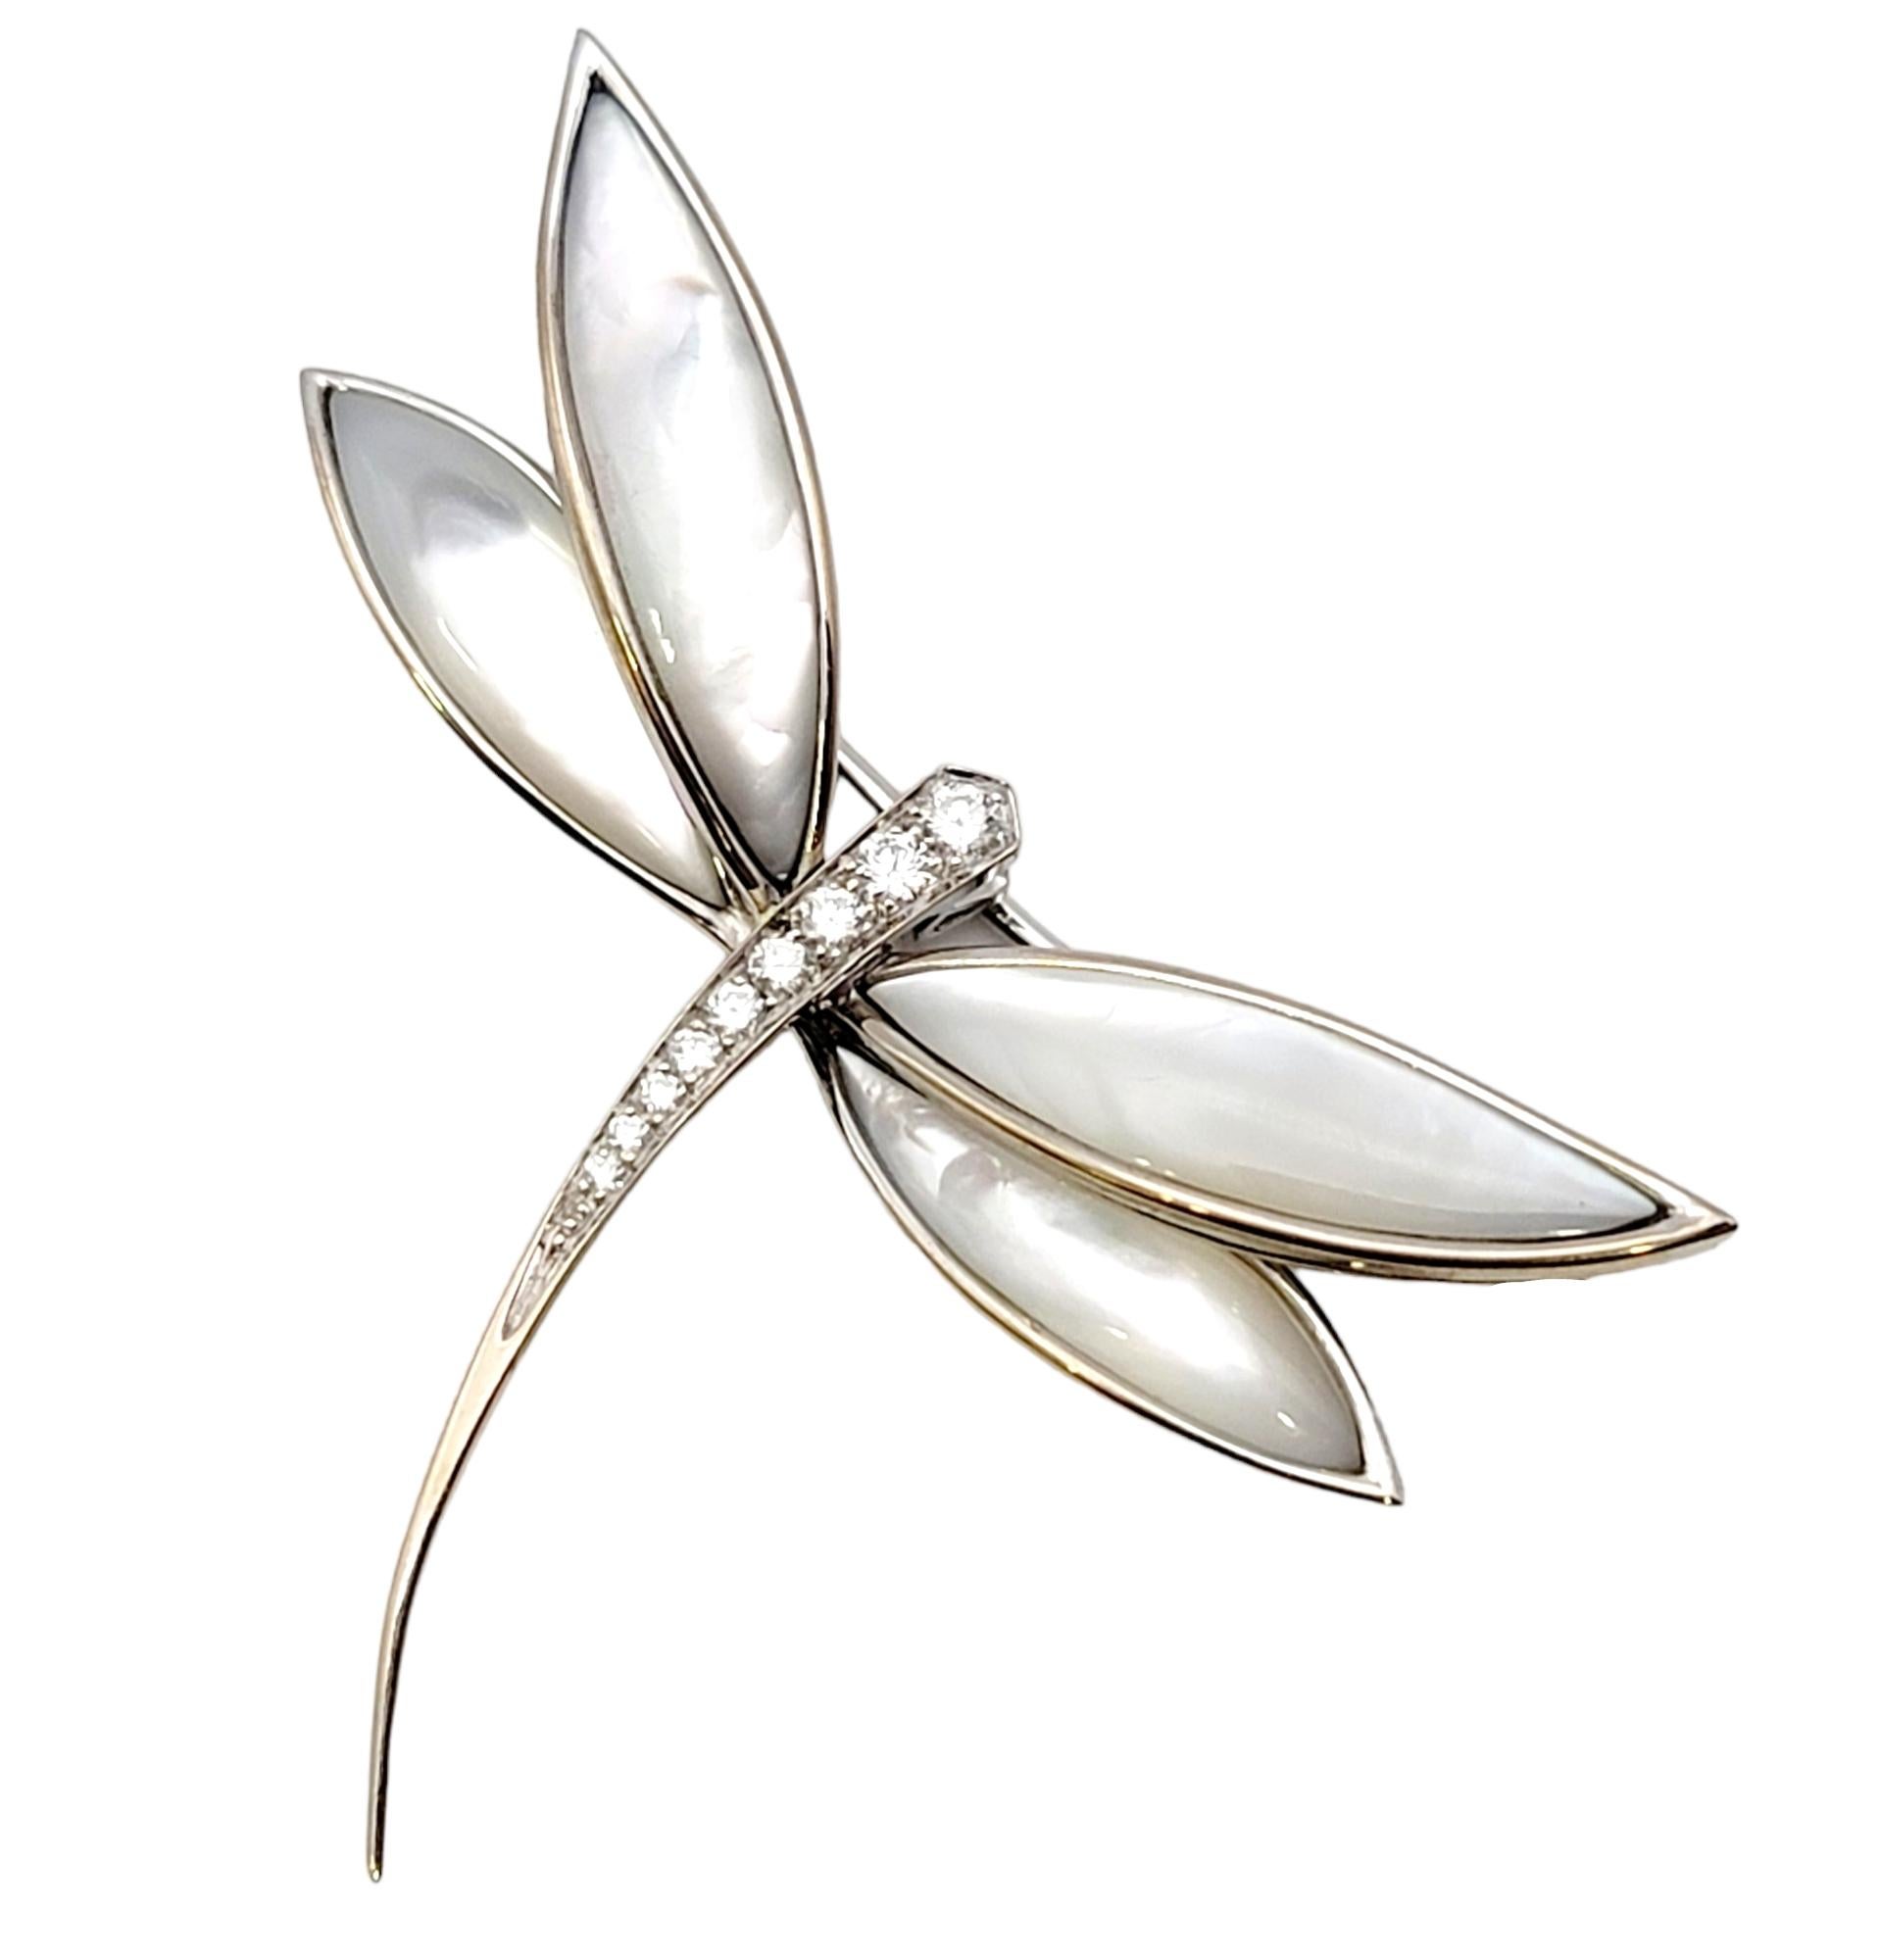 This stunning Van Cleef & Arpels lady's brooch is the absolute perfect addition to your jewelry collection. Dating back to 1906, Van Cleef & Arpels is known as one of the world's leaders in fine jewelry craftsmanship, working with only the highest